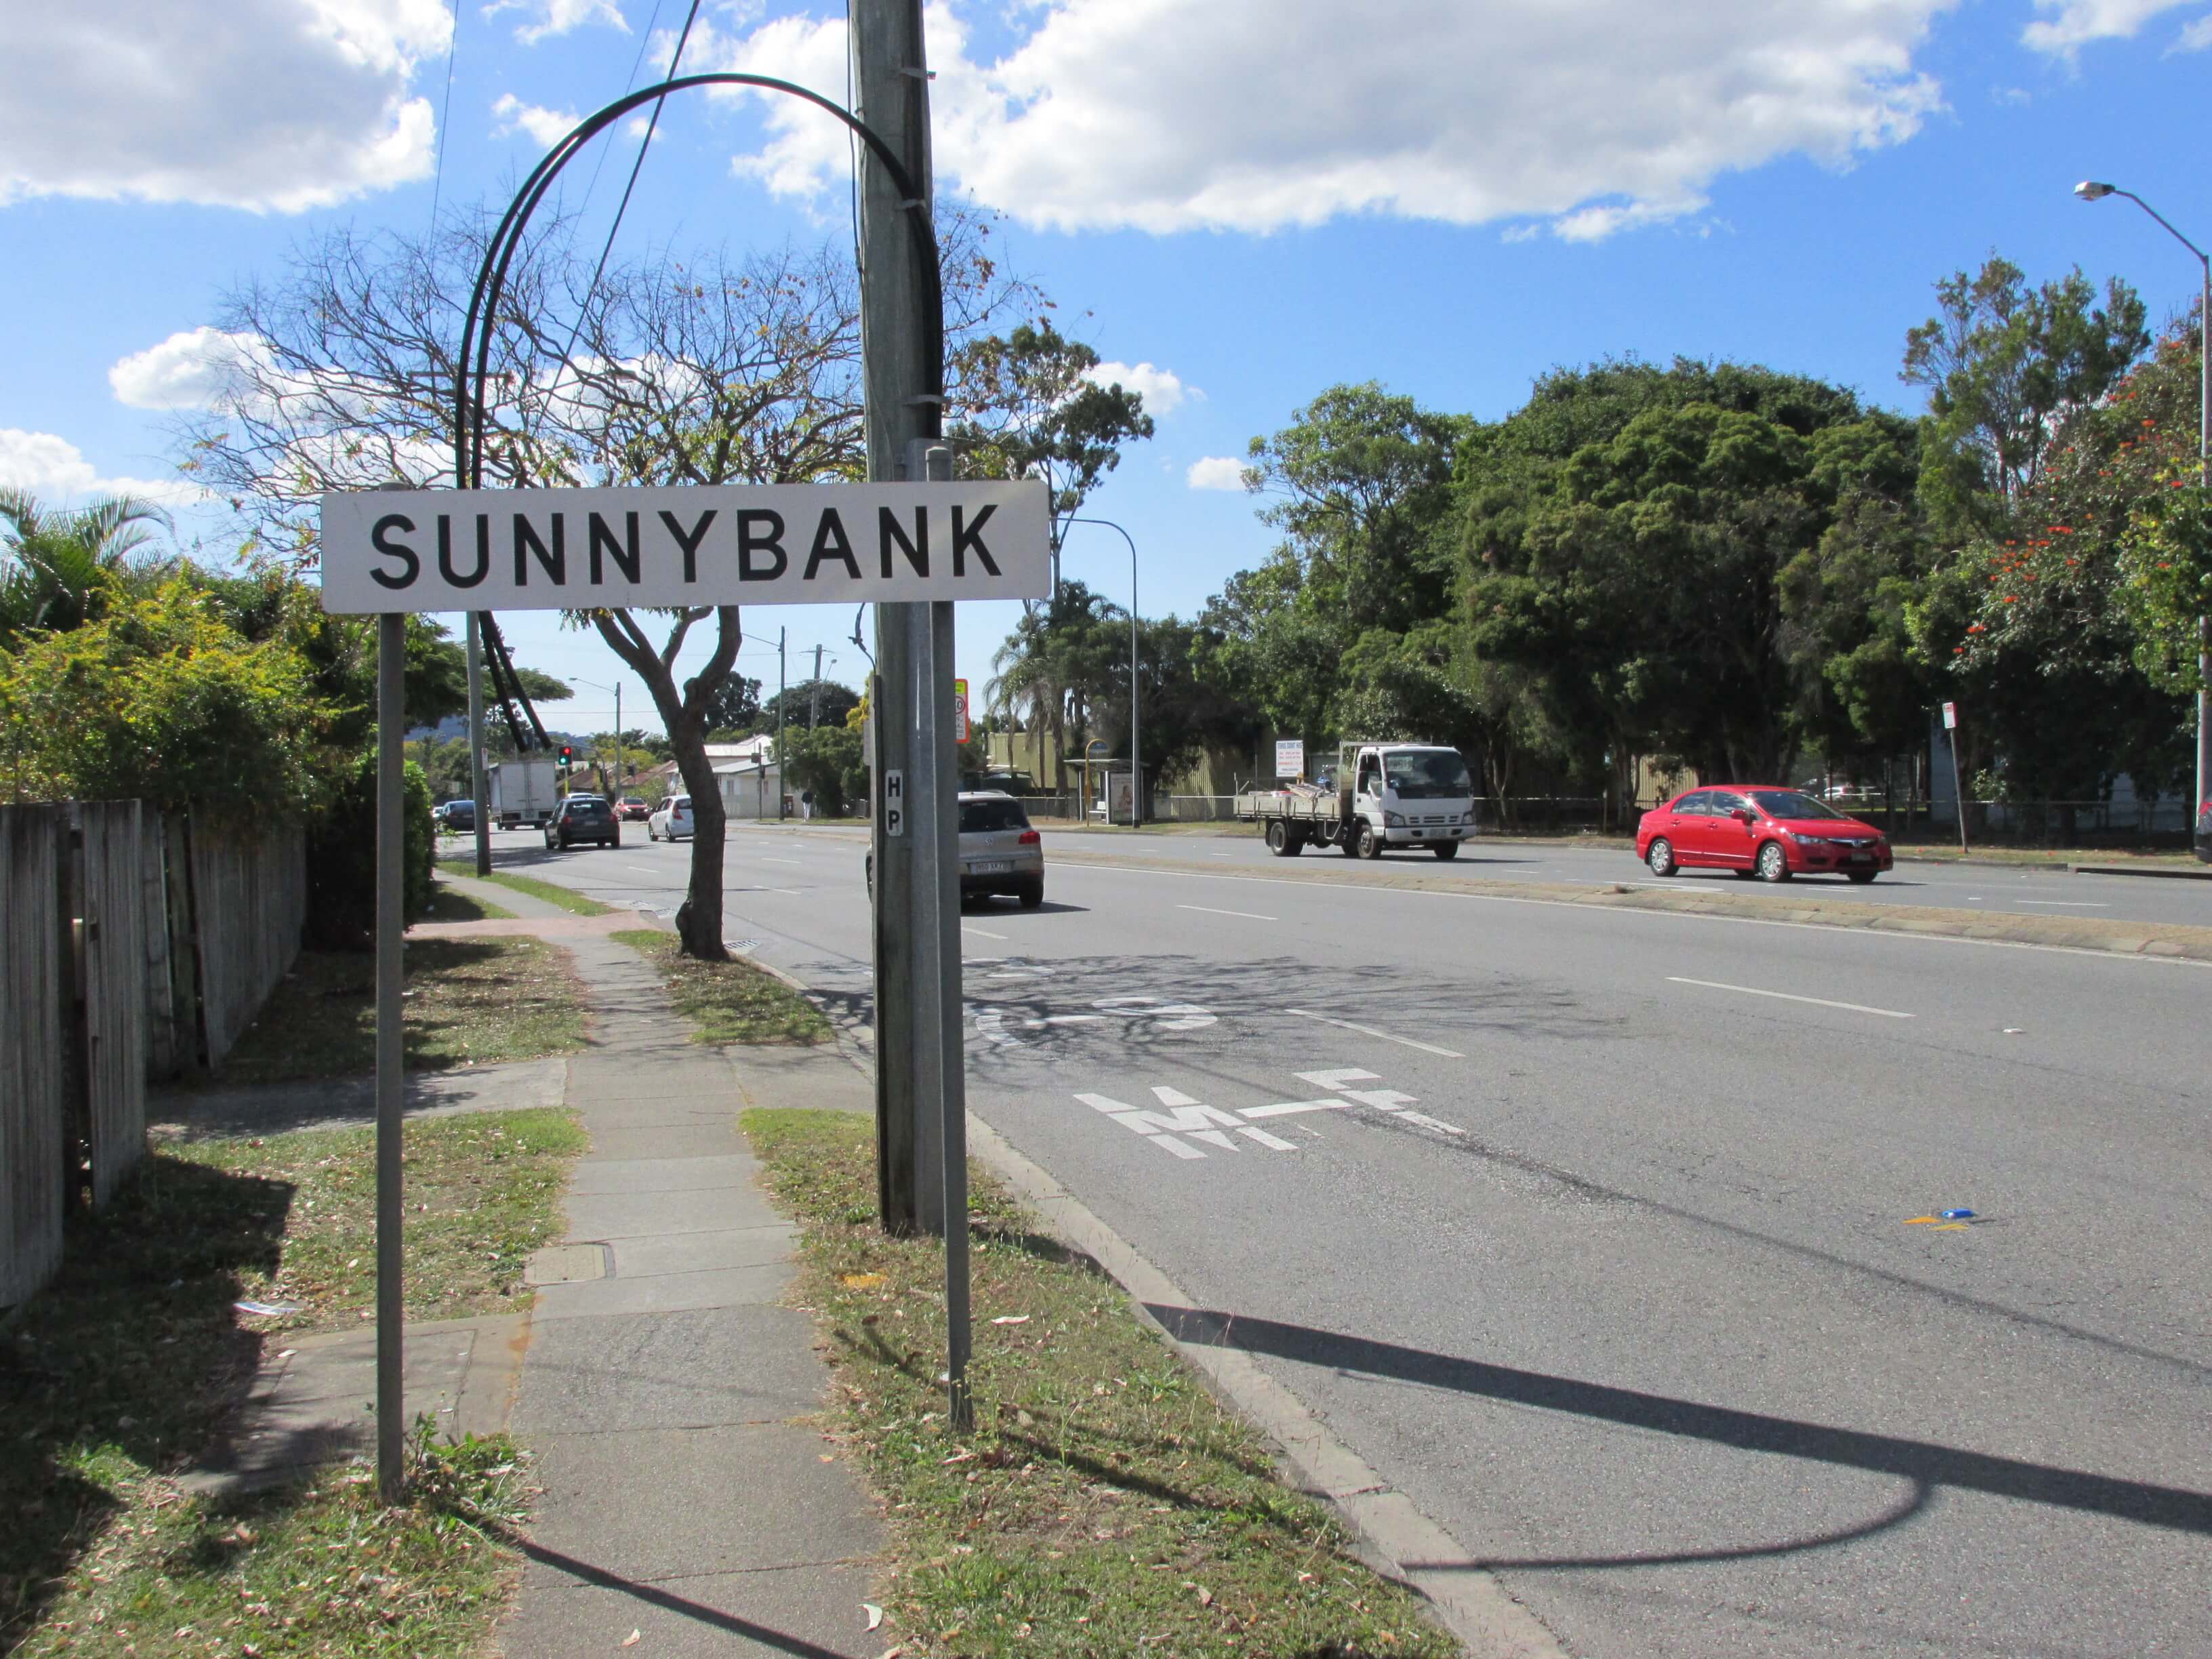 About Sunnybank